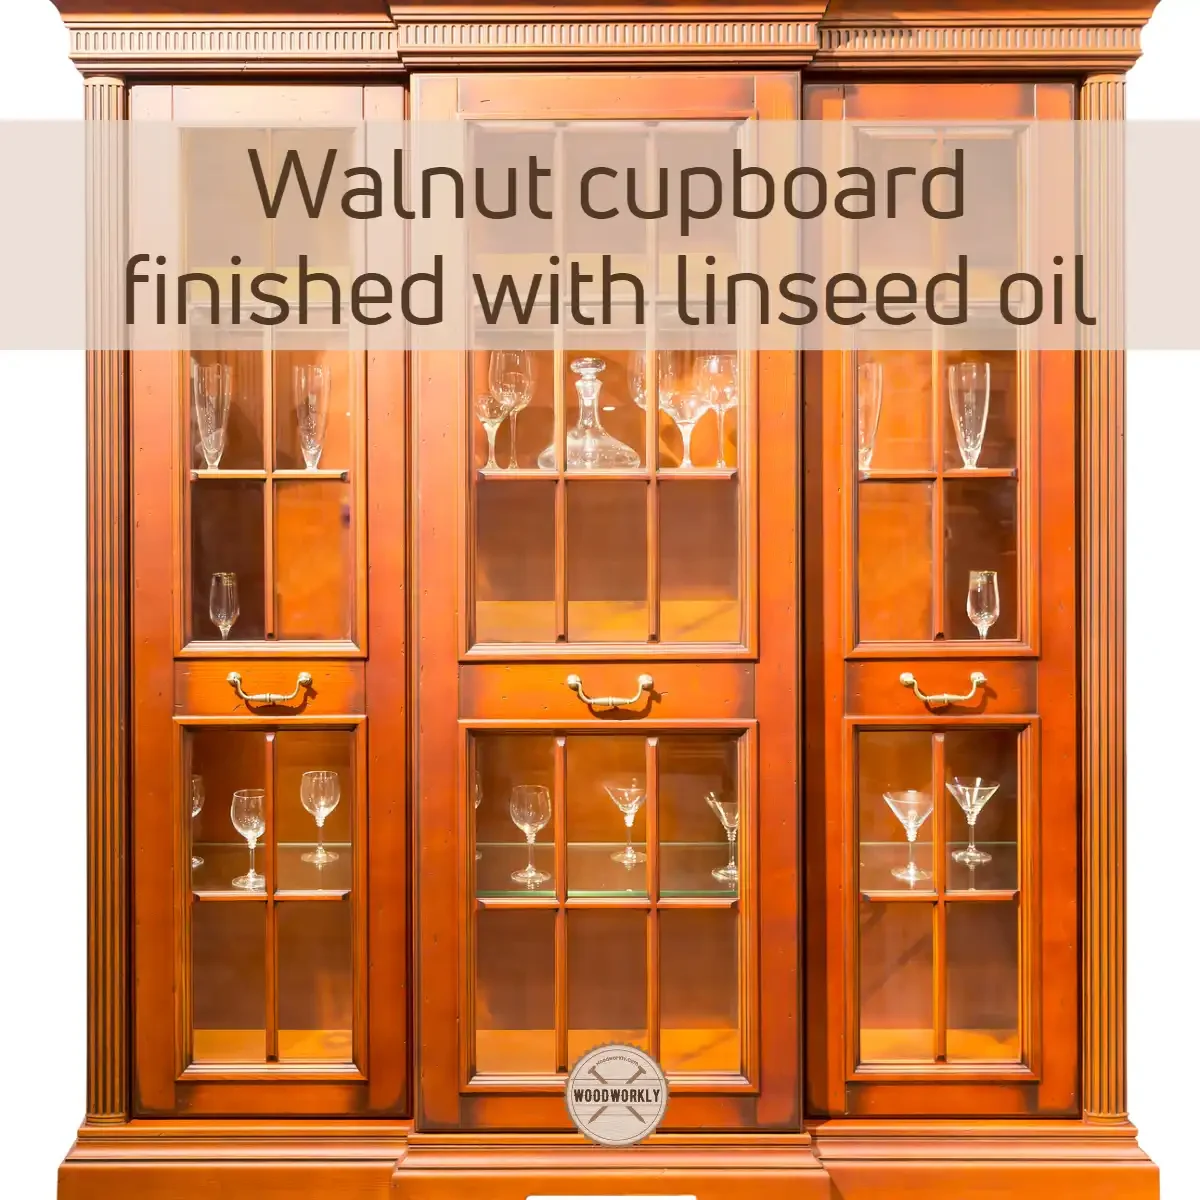 Walnut cupboard finished with linseed oil